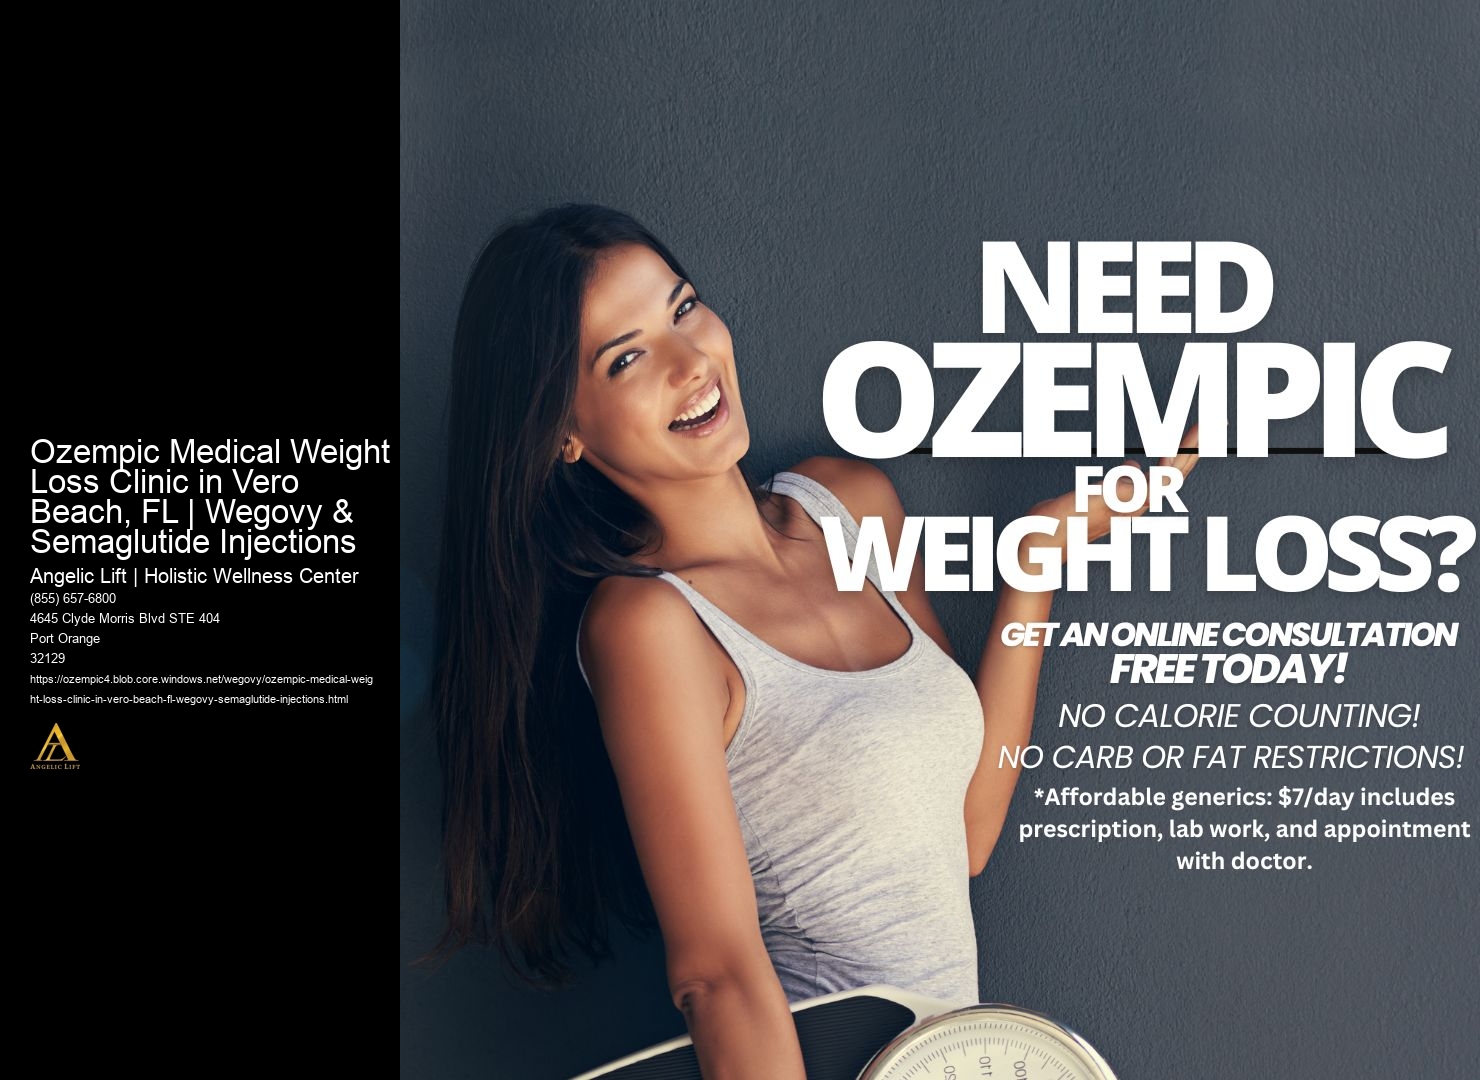 Ozempic Medical Weight Loss Clinic in Vero Beach, FL | Wegovy & Semaglutide Injections